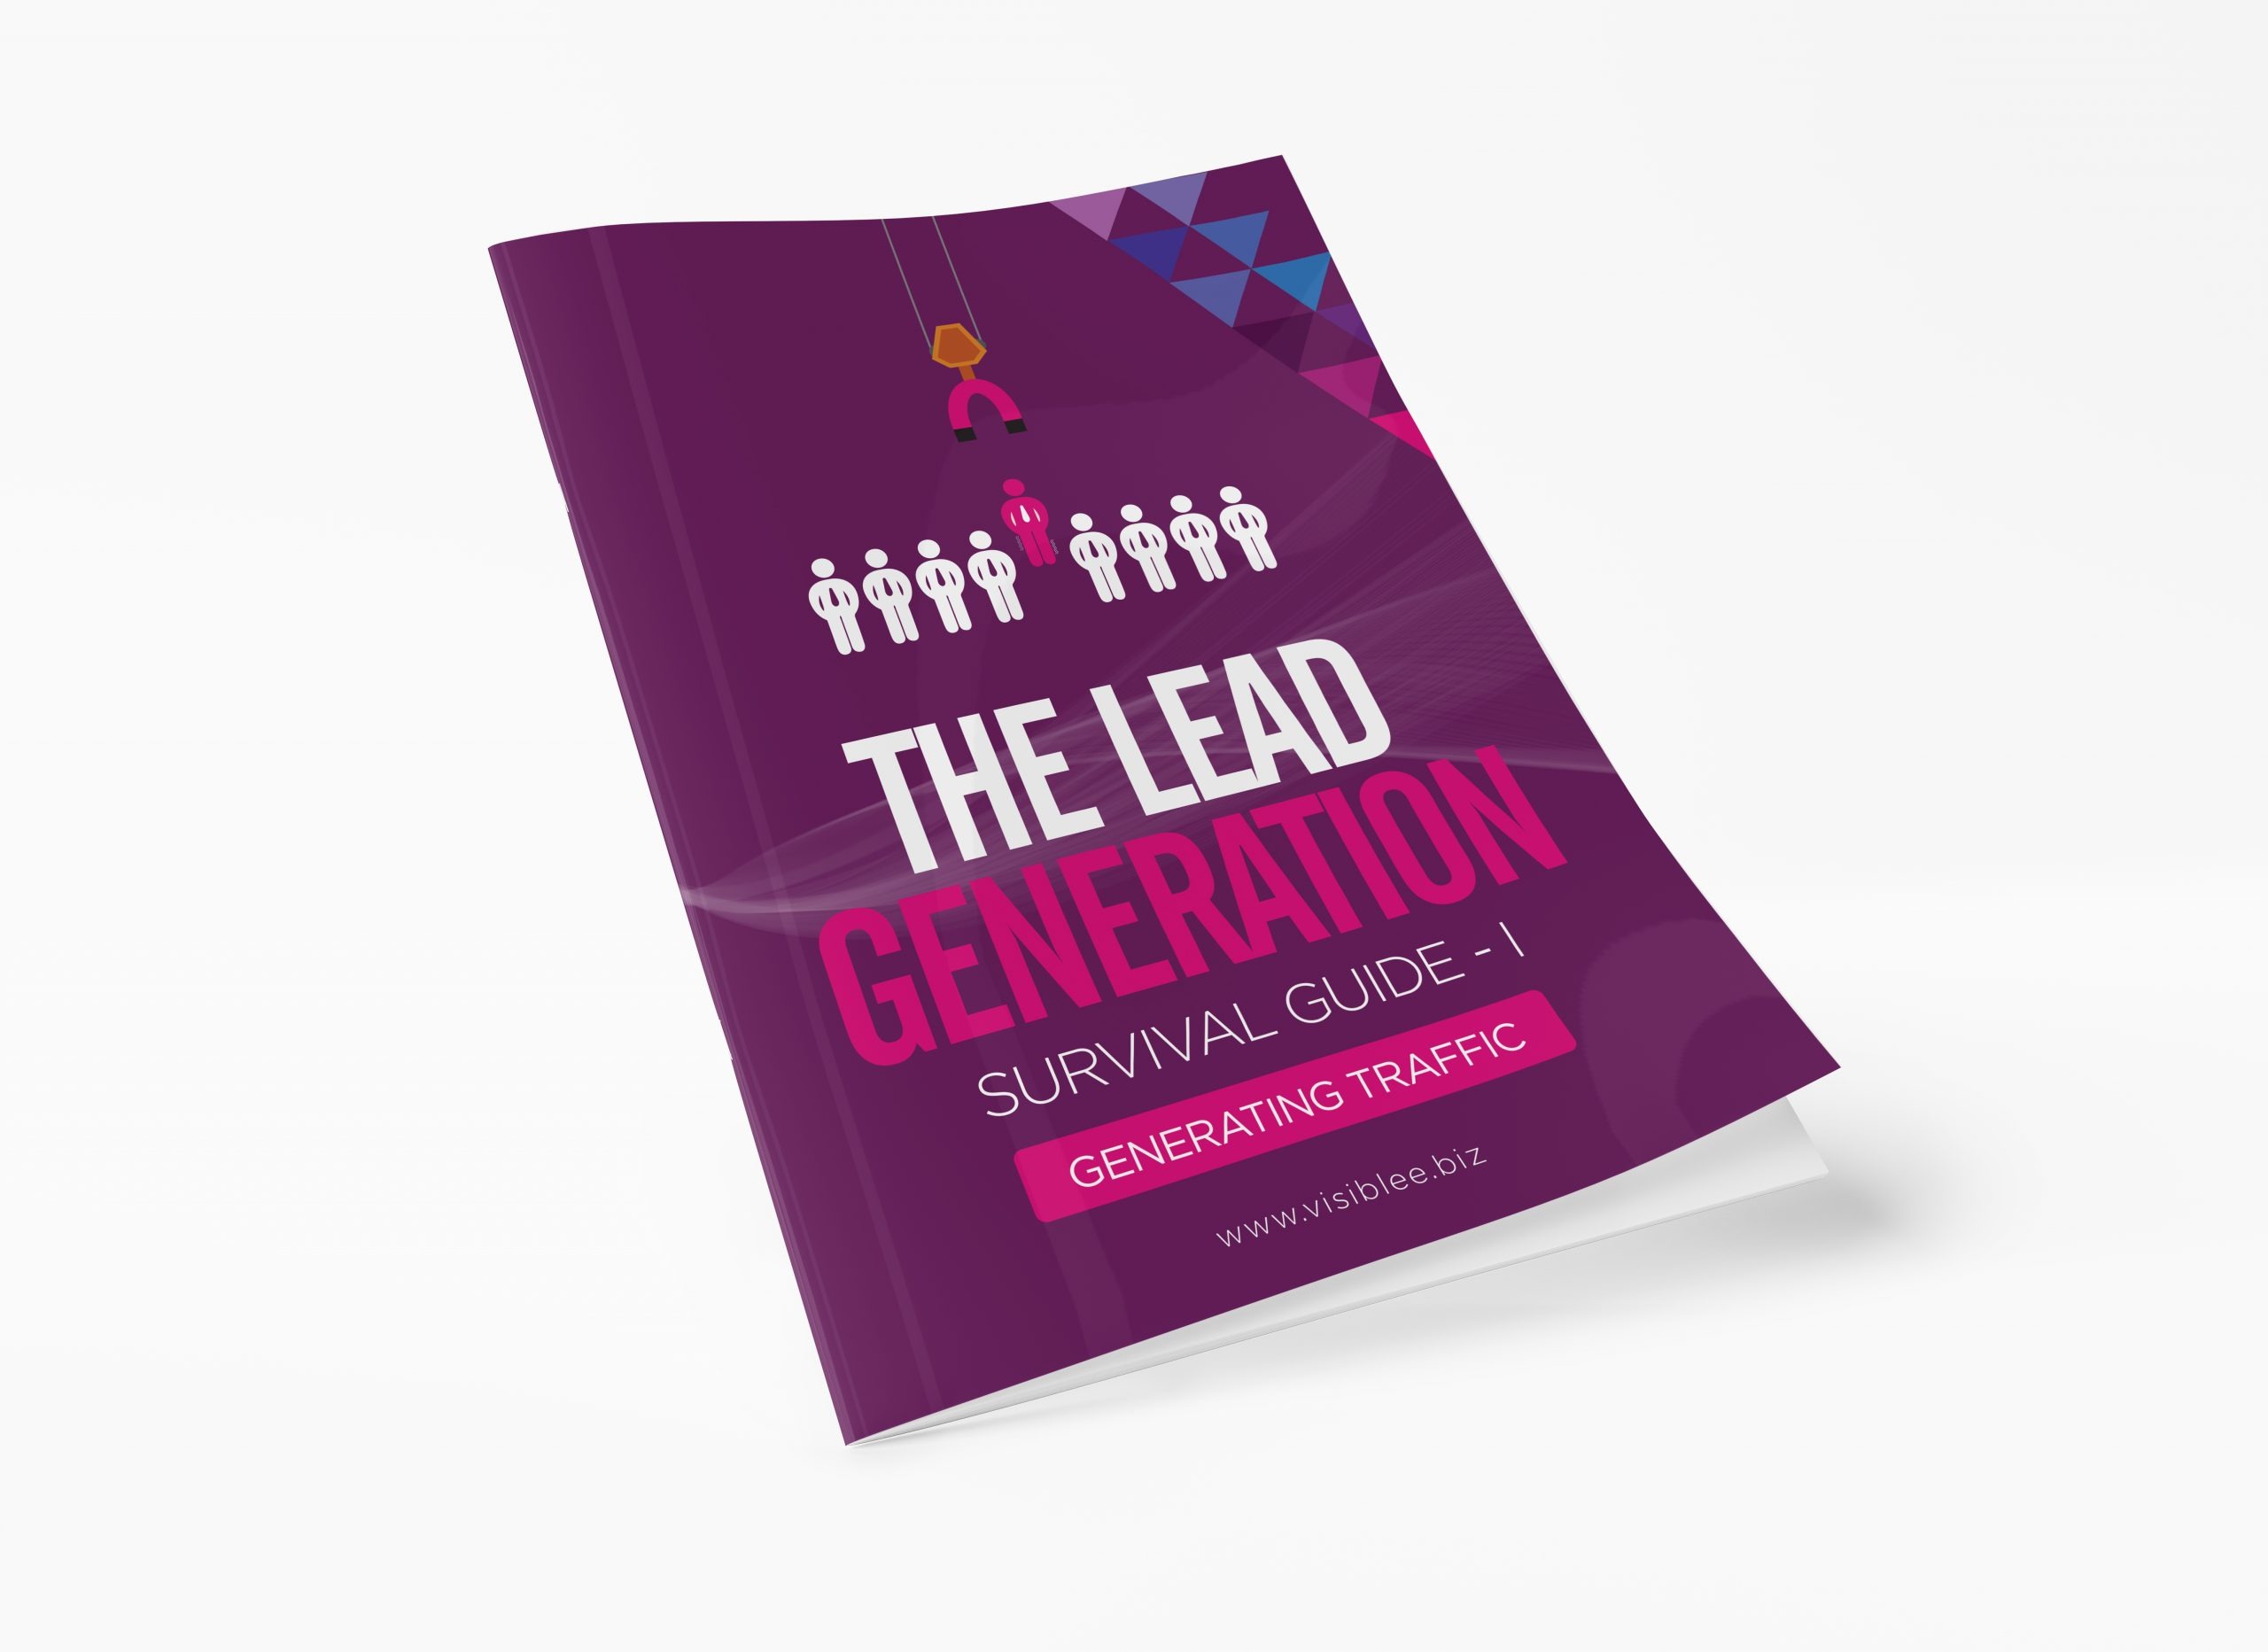 The Lead Generation Survival Guide I : Generating Traffic